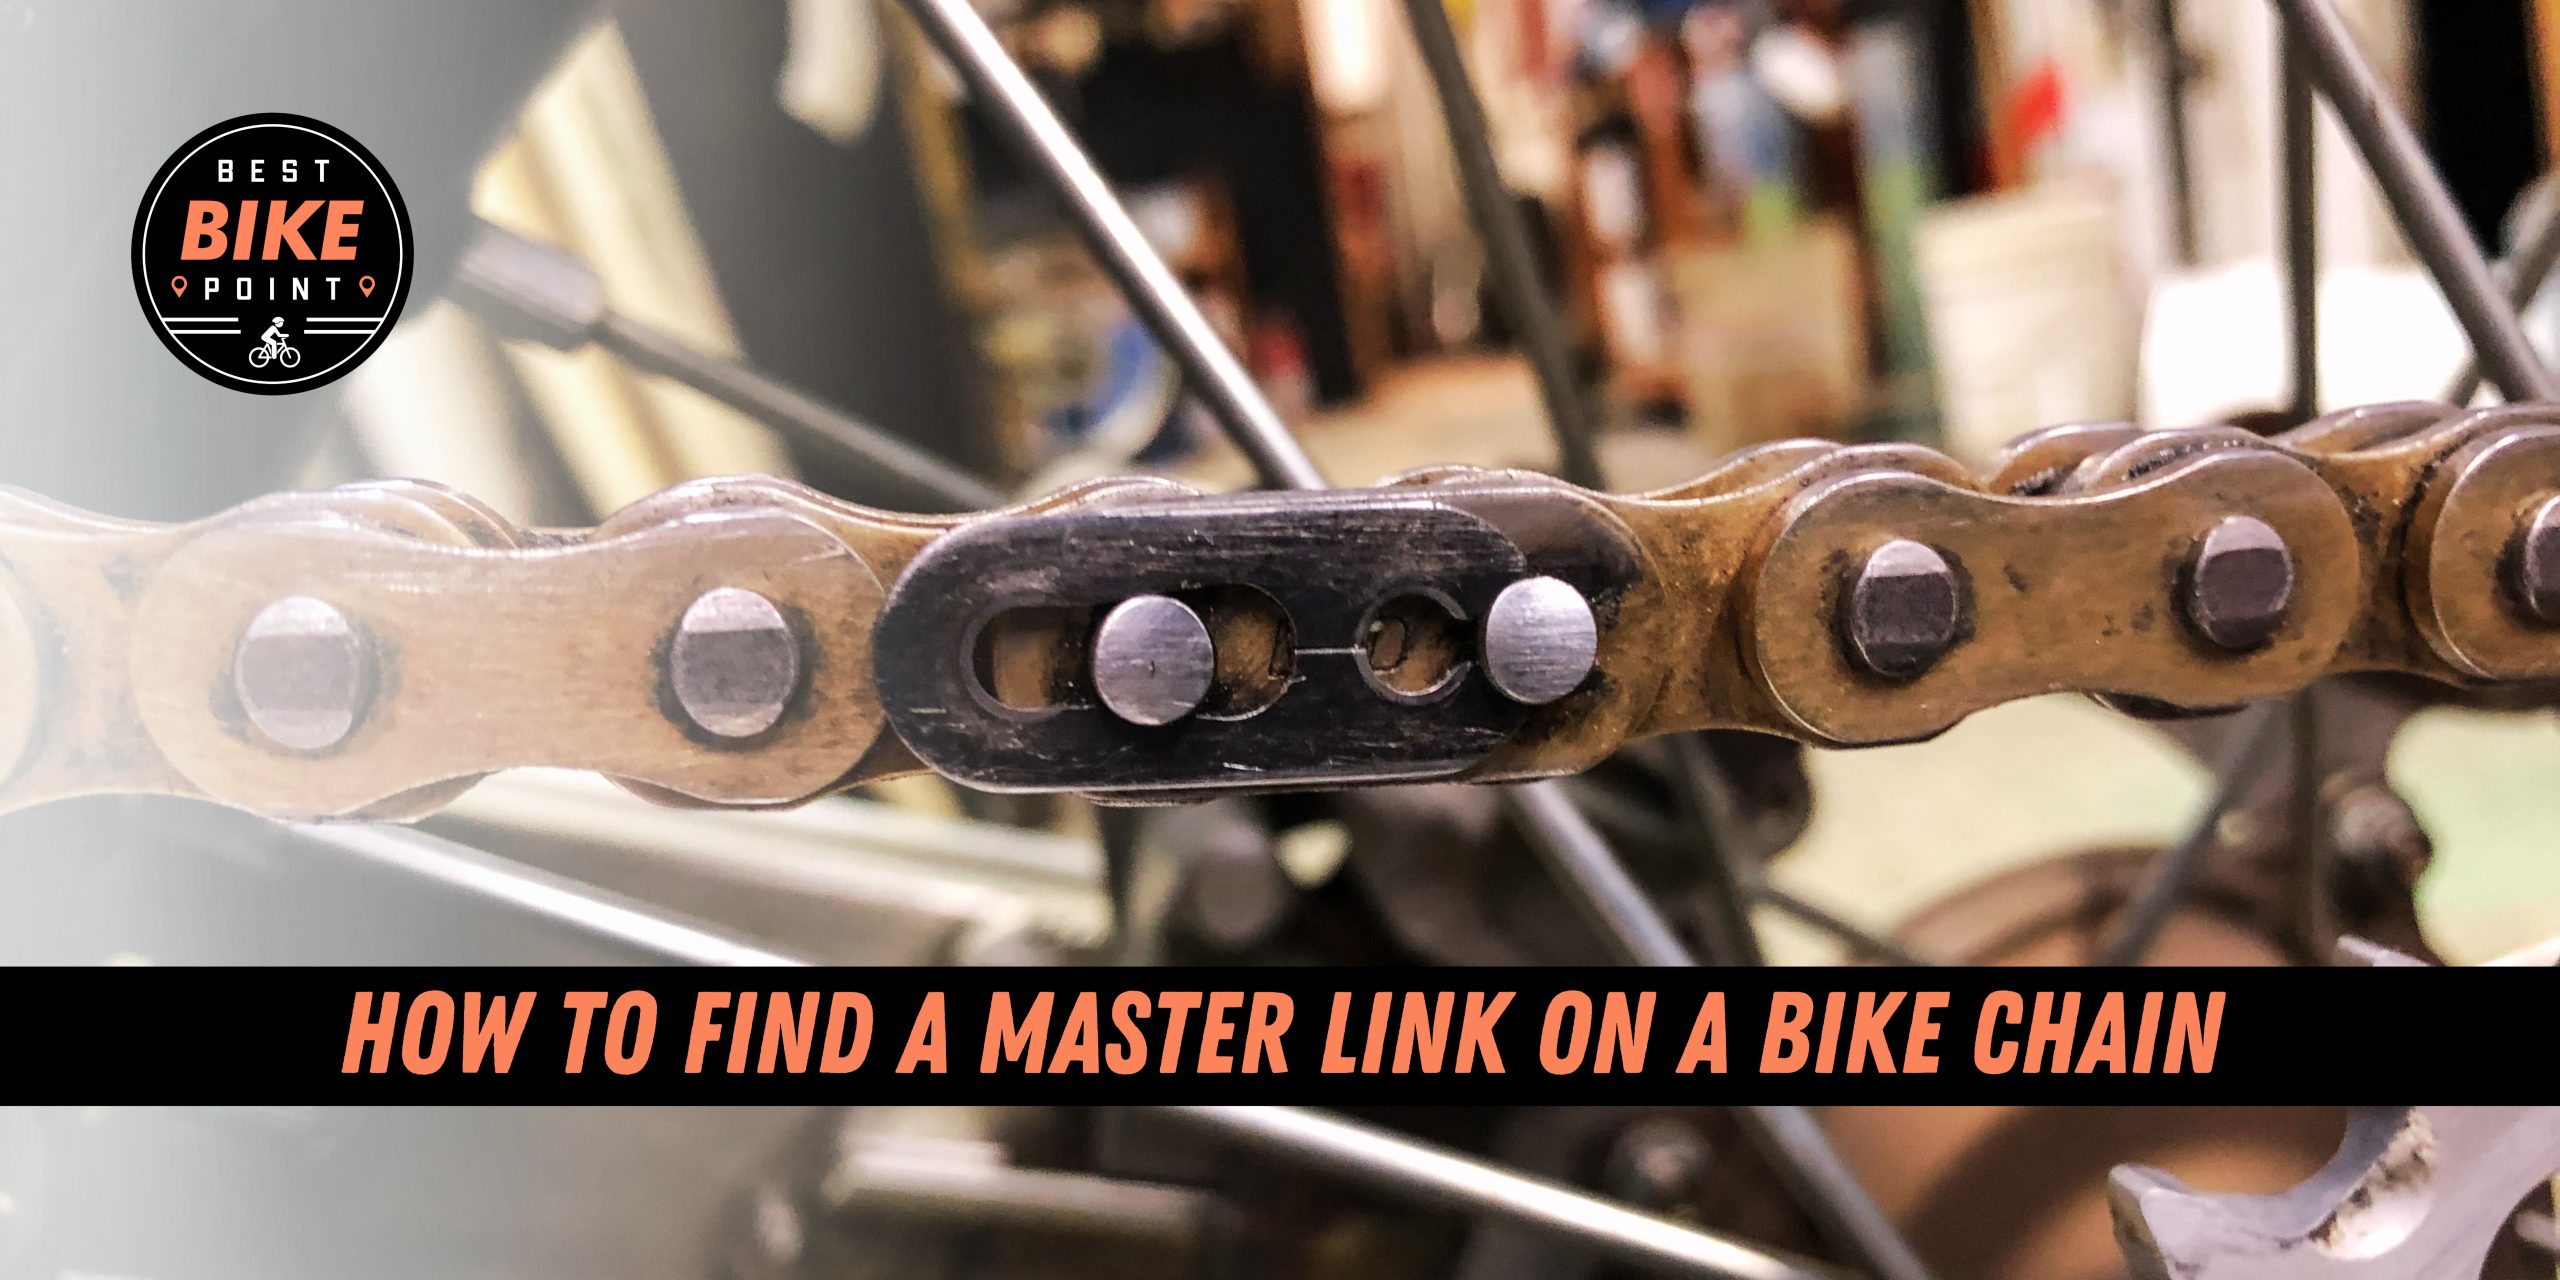 How to Spot a Master Link on a Bike Chain